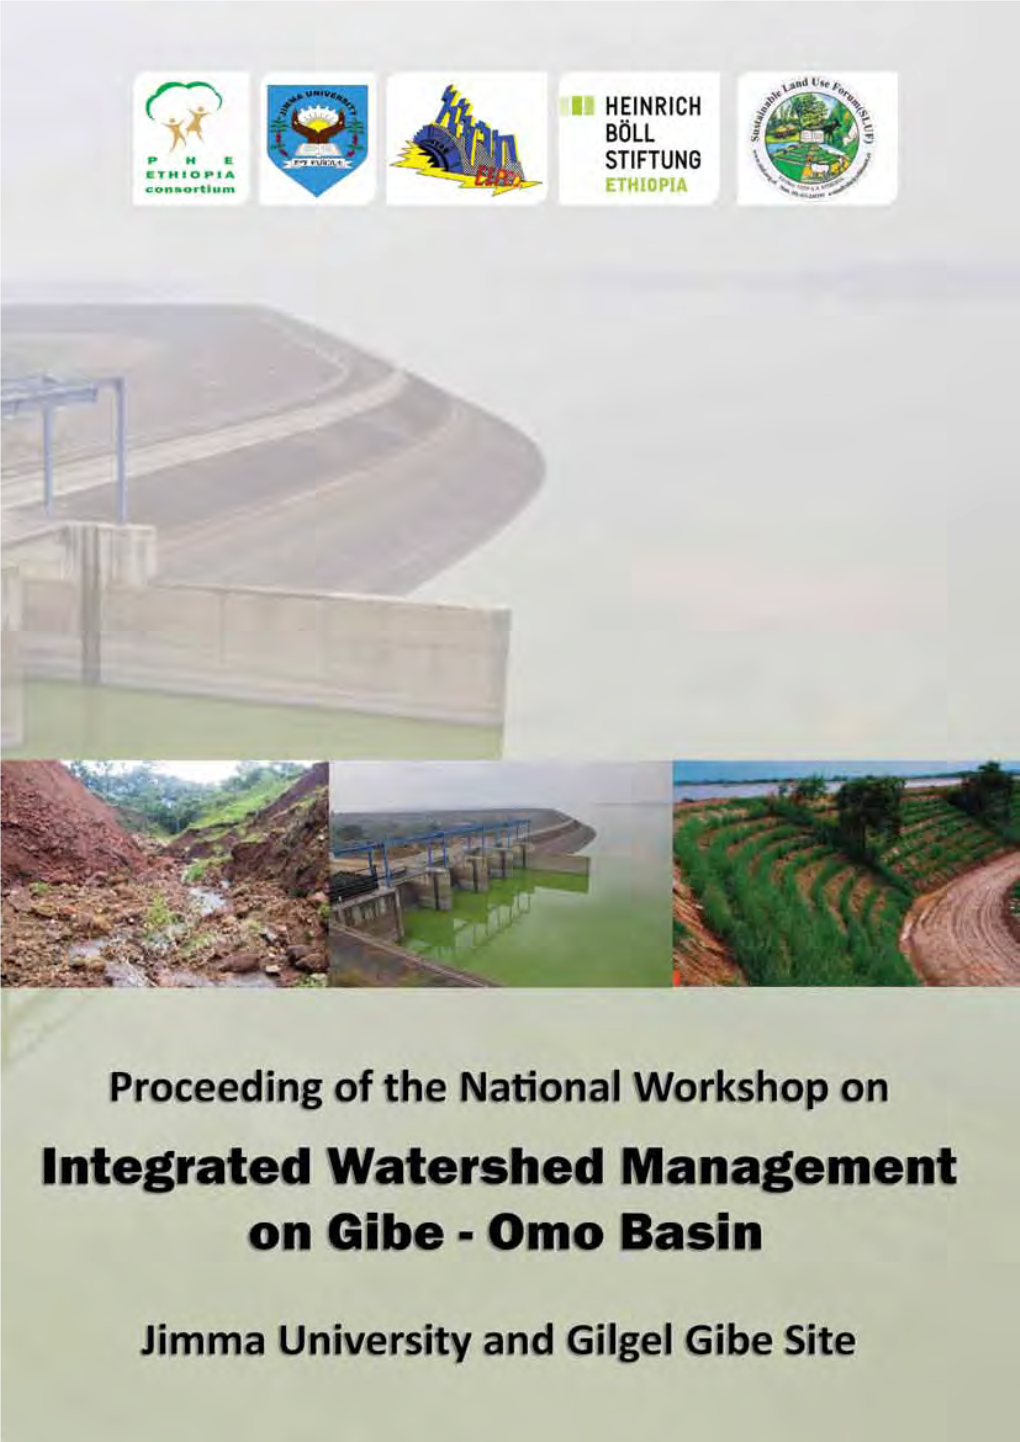 Integrated Watershed Management on Gibe - Omo Basin